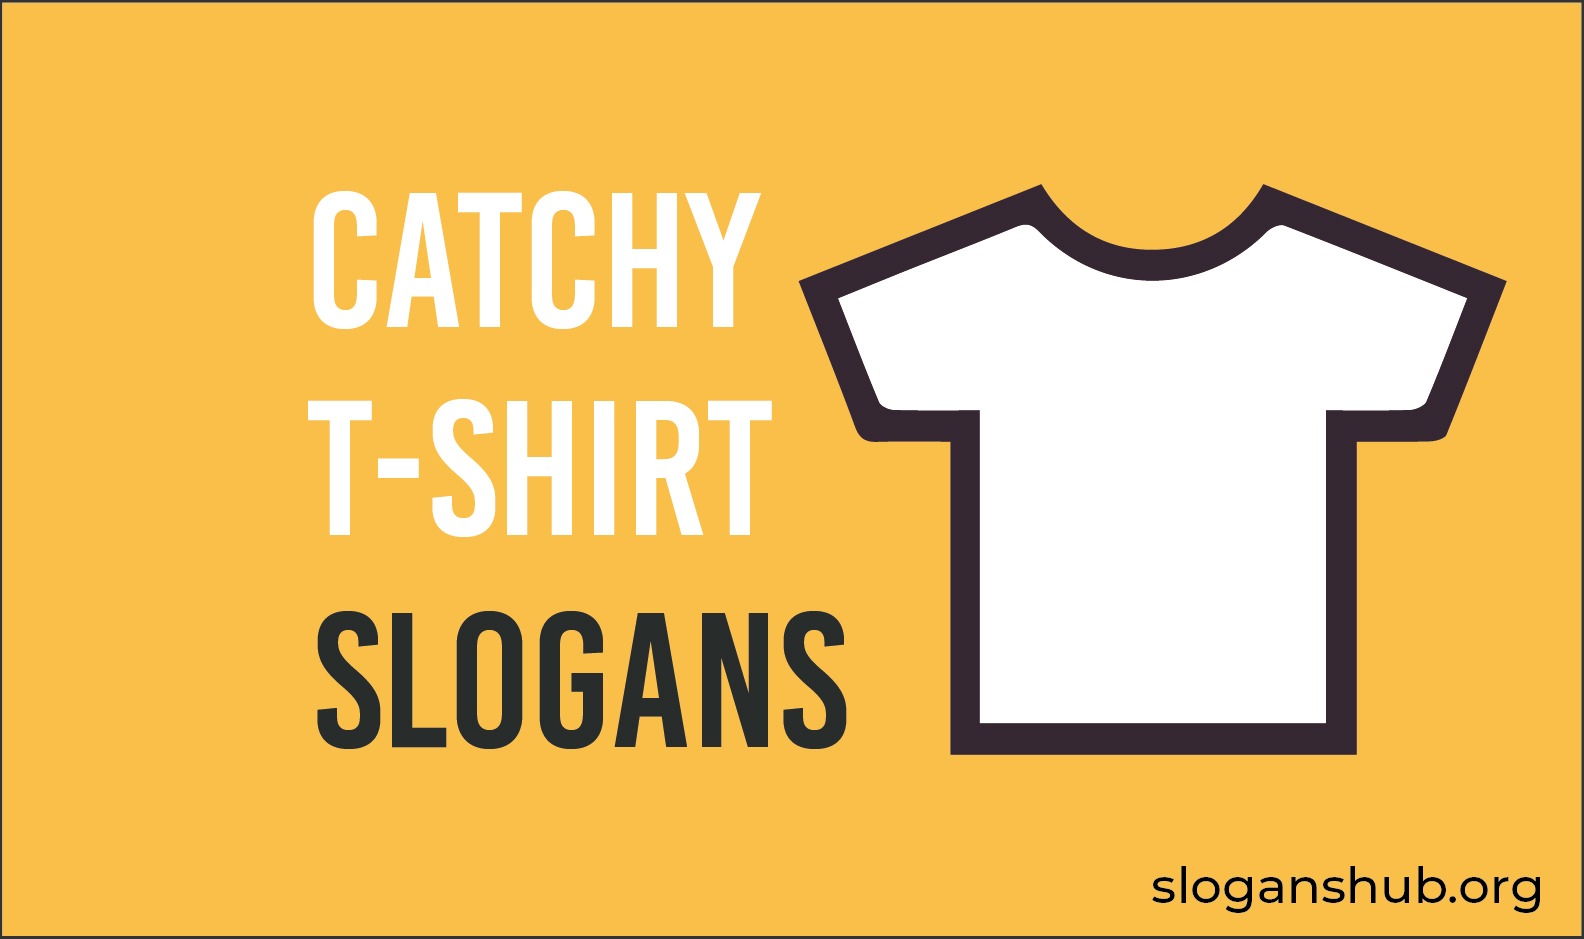 70 Catchy T-shirt Slogans for Moms